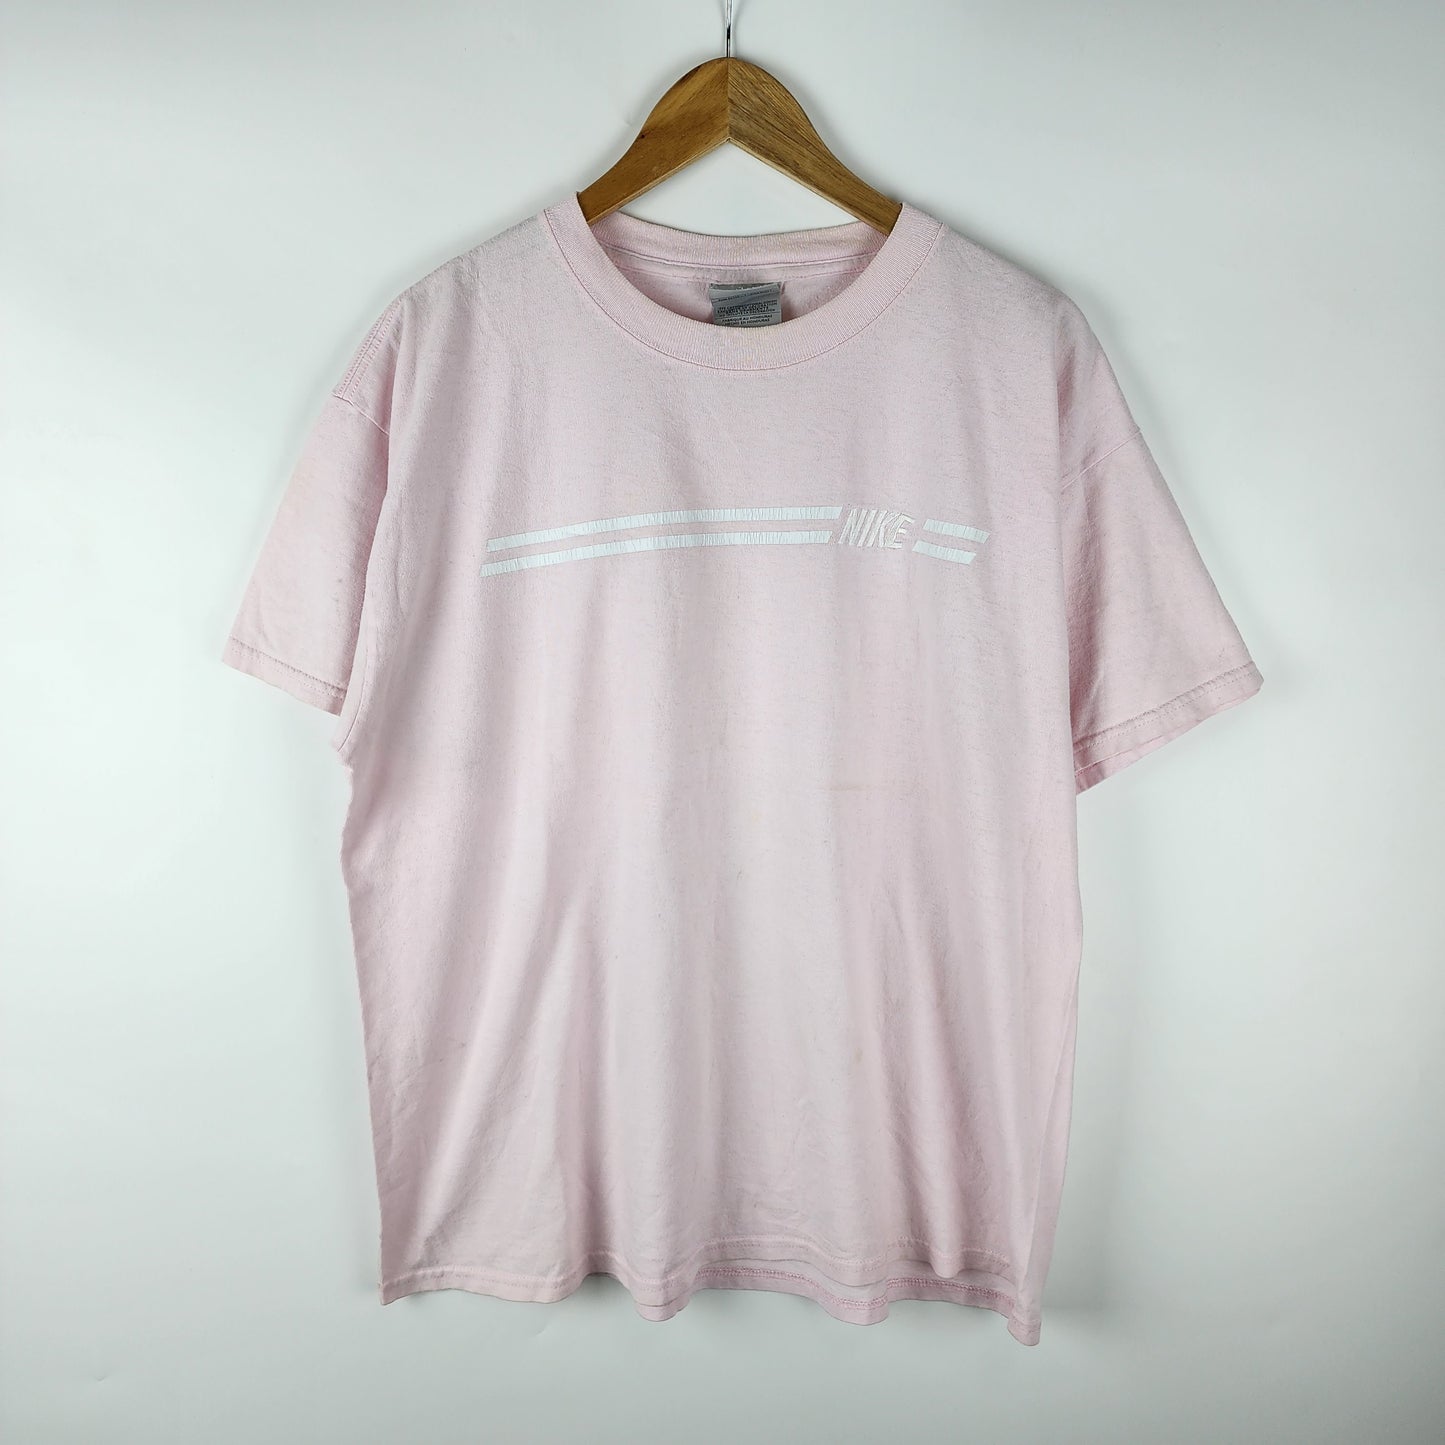 Vintage Nike Spellouts stripes 00's Pink T-shirt 